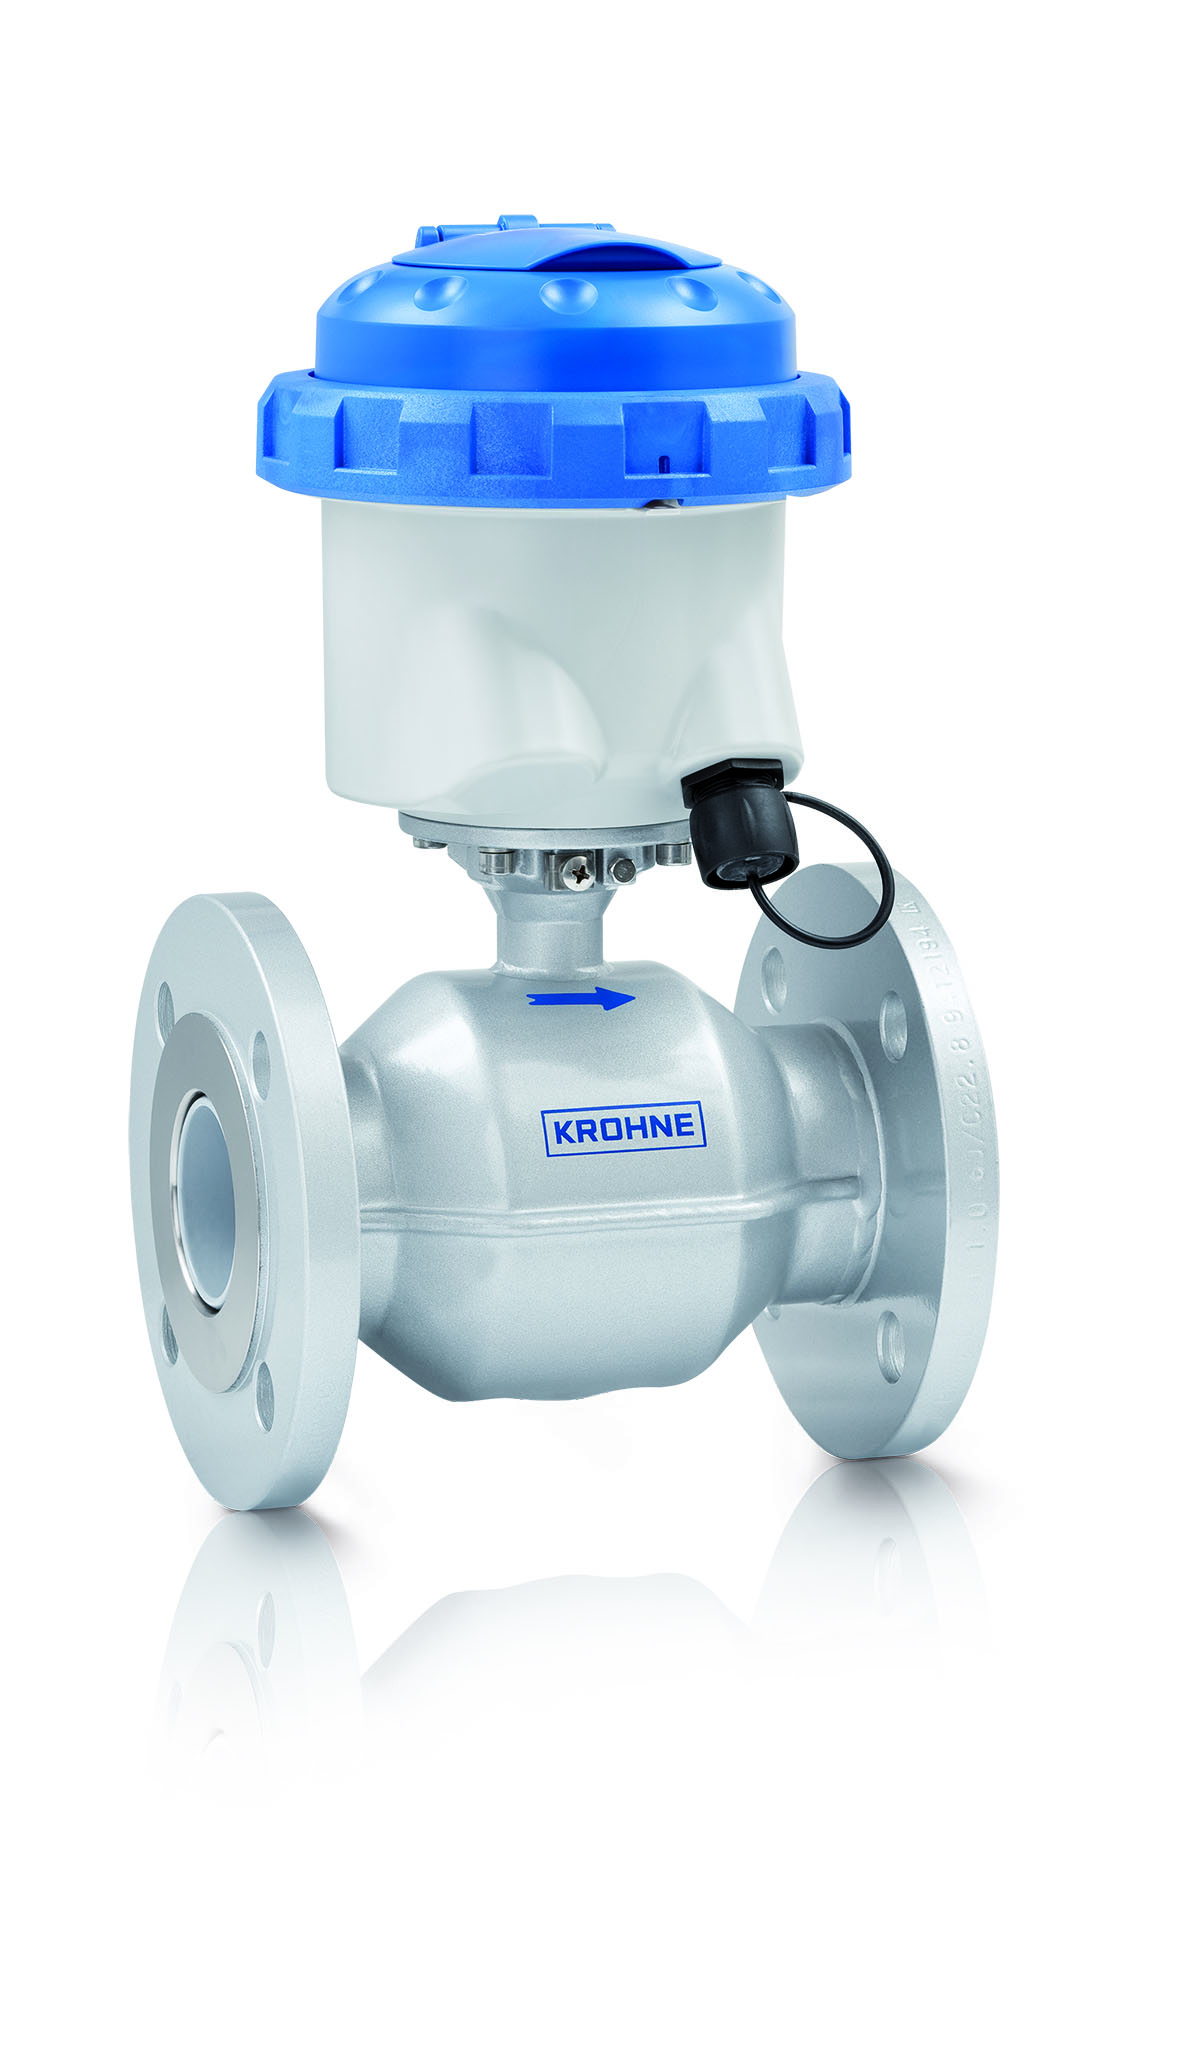 Krohne is now producing its WATERFLUX 3000 water meter at its manufacturing and calibration facility located in Beverly, MA.